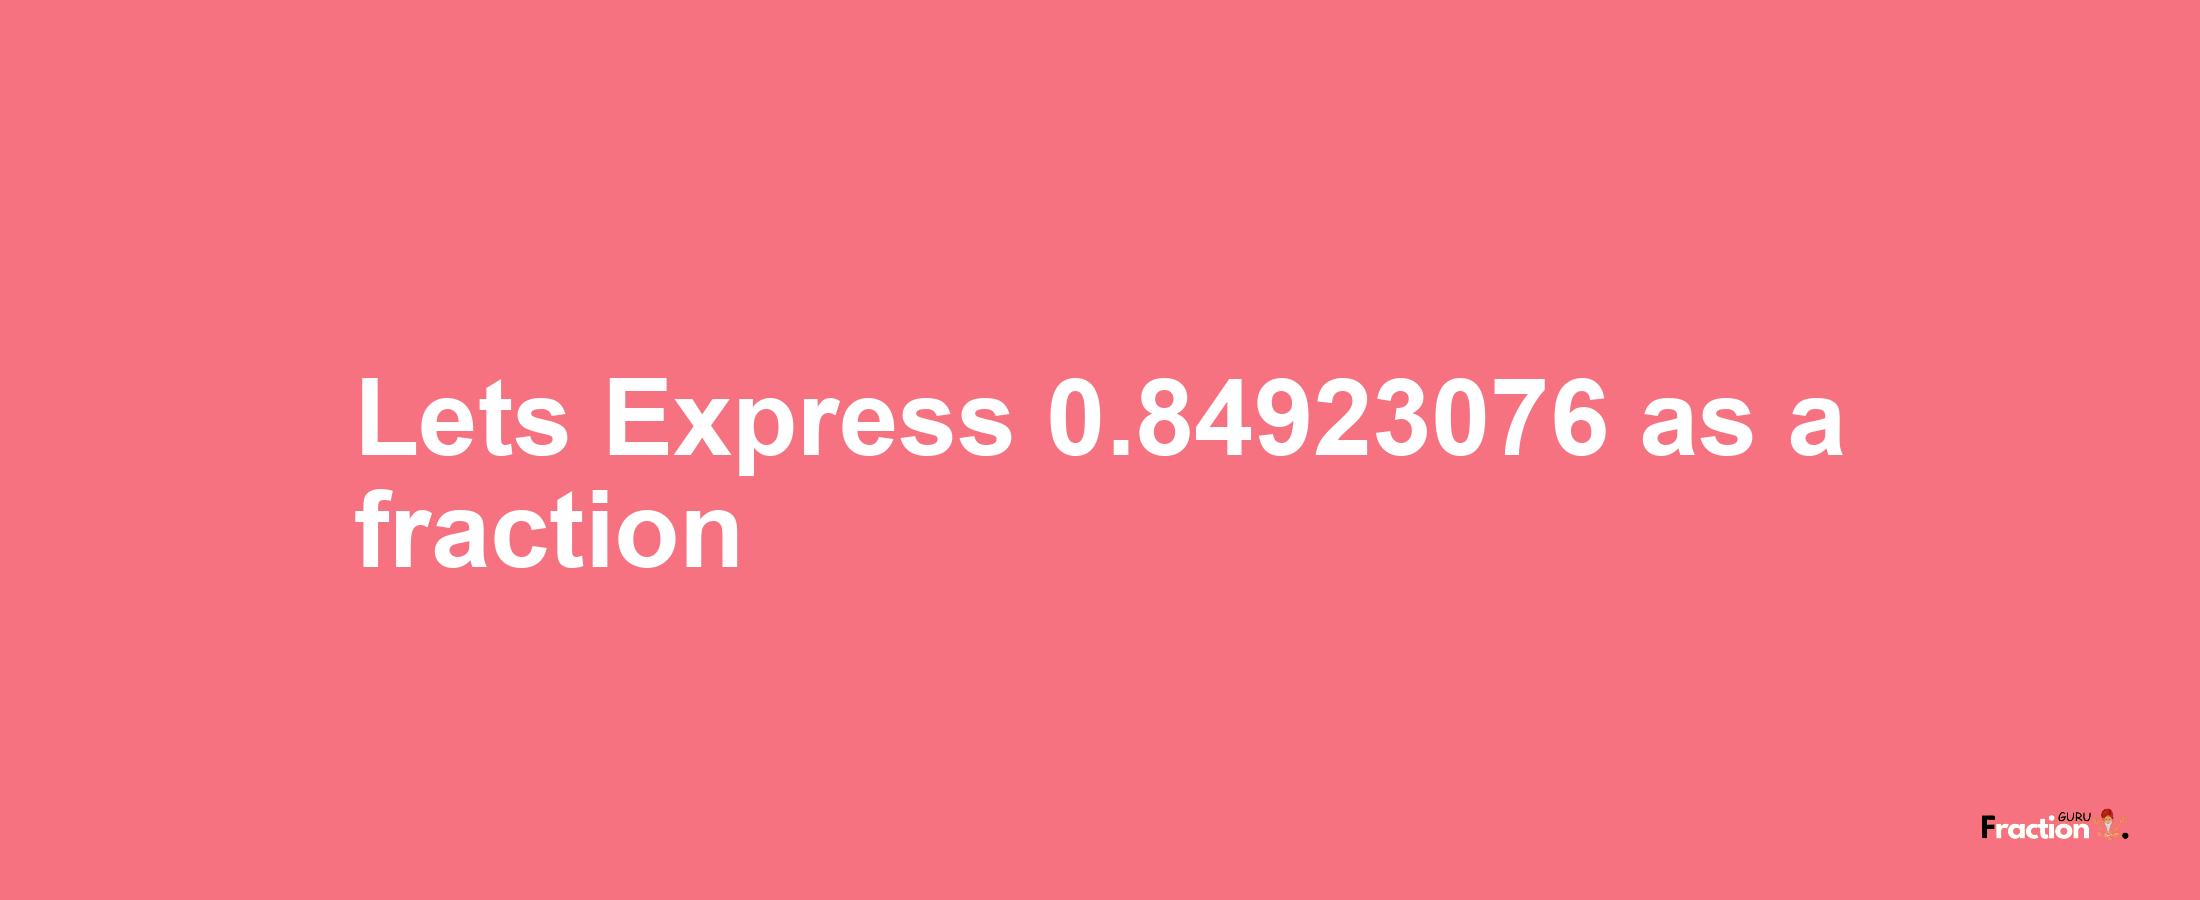 Lets Express 0.84923076 as afraction